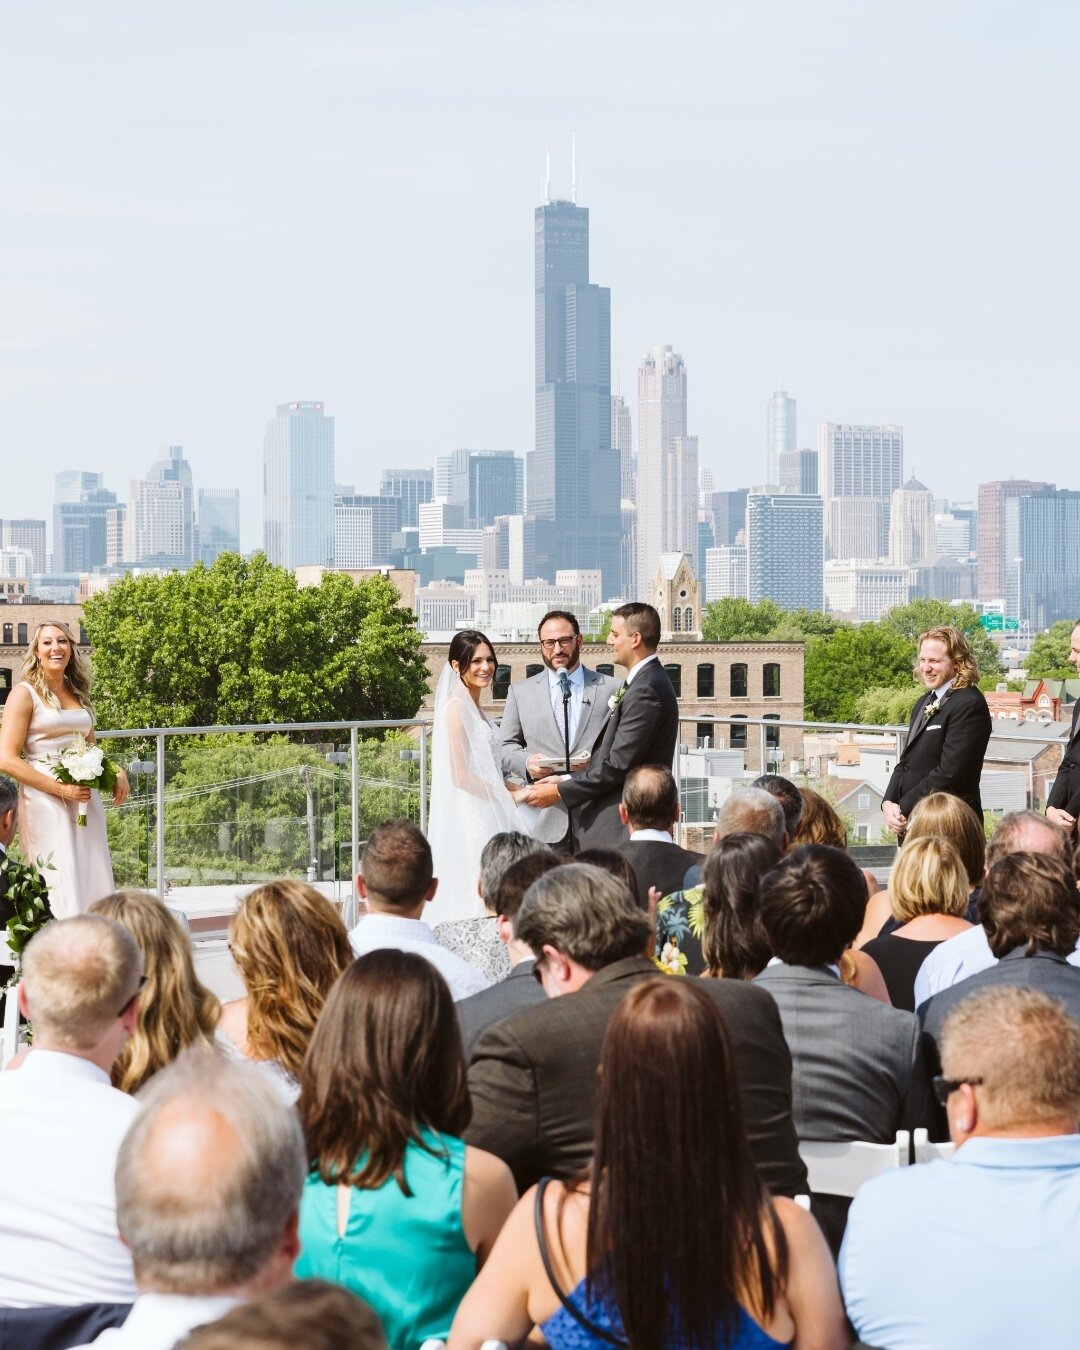 The only wedding backdrop that is sure to take your breath away 🤩🏙️

📸 @vossandvirtue
.
.
.
#lacunaevents #lacunalofts #chicagoeventvenue #chicagowedding #rooftopwedding #weddingphotography #ChicagoWeddings #ChicagoEvents #brideinspiration #huffpo